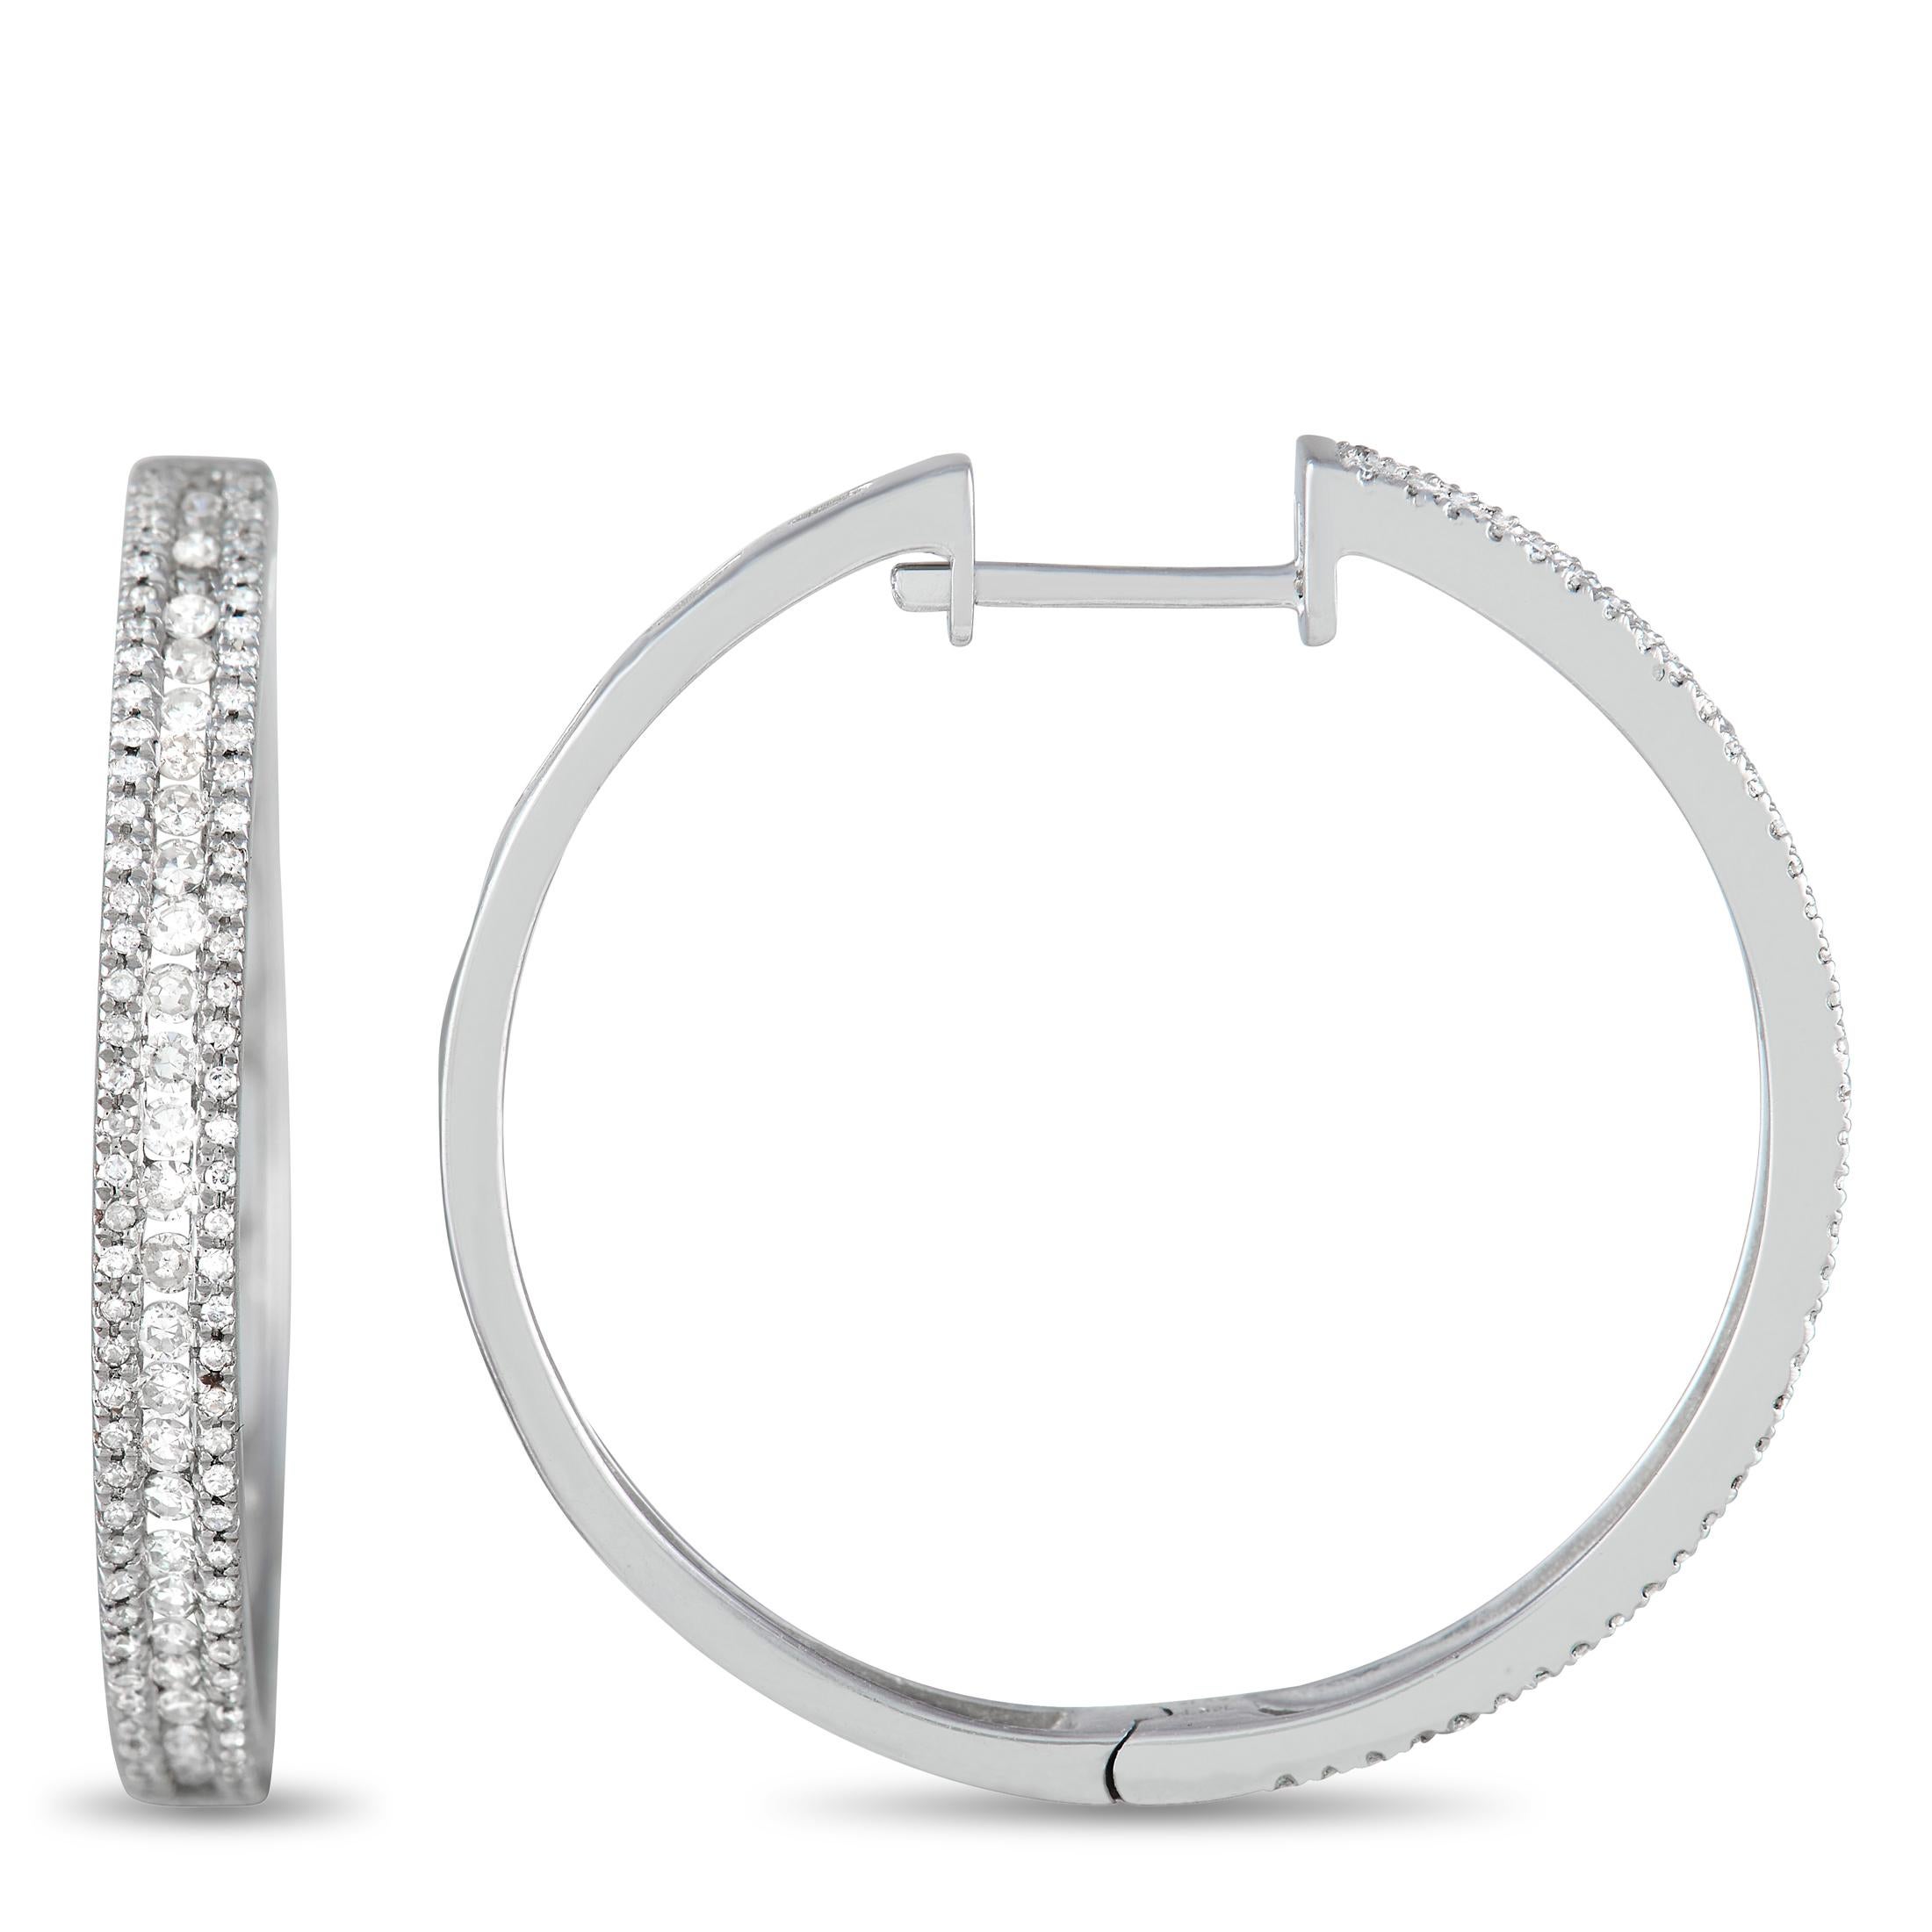 The prestigious sheen of 14K white gold and the alluring glisten of diamonds harmoniously combine into creating a wonderfully sophisticated sight in these stunning hoop earrings. The pair weighs 14.7 grams and the diamonds total 1.06 carats.
